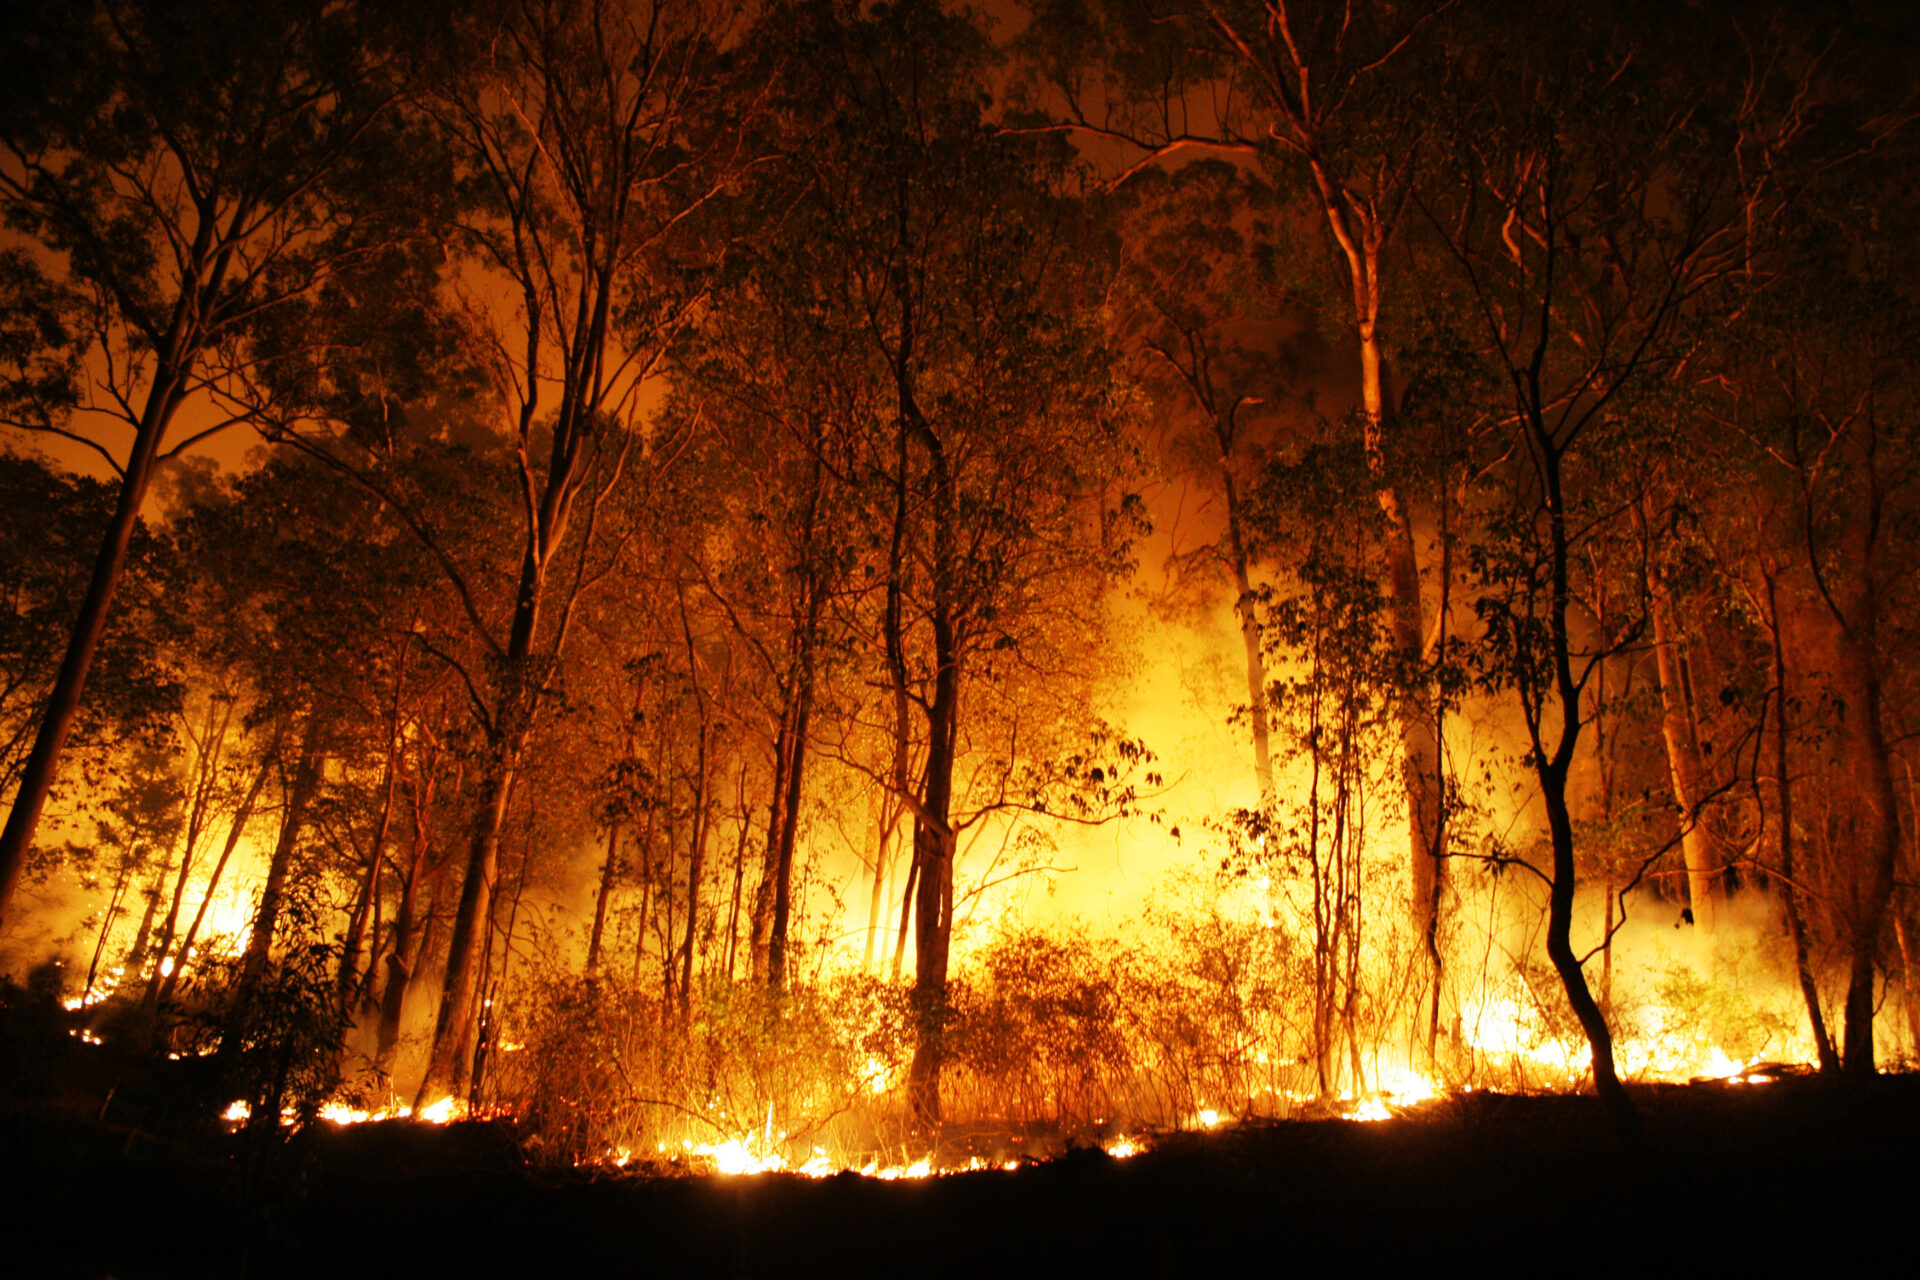 The forest fire in Cyprus’ Troodos Mountains region has claimed the lives of four people. Photo by Peter J. Wilson via Shutterstock.com